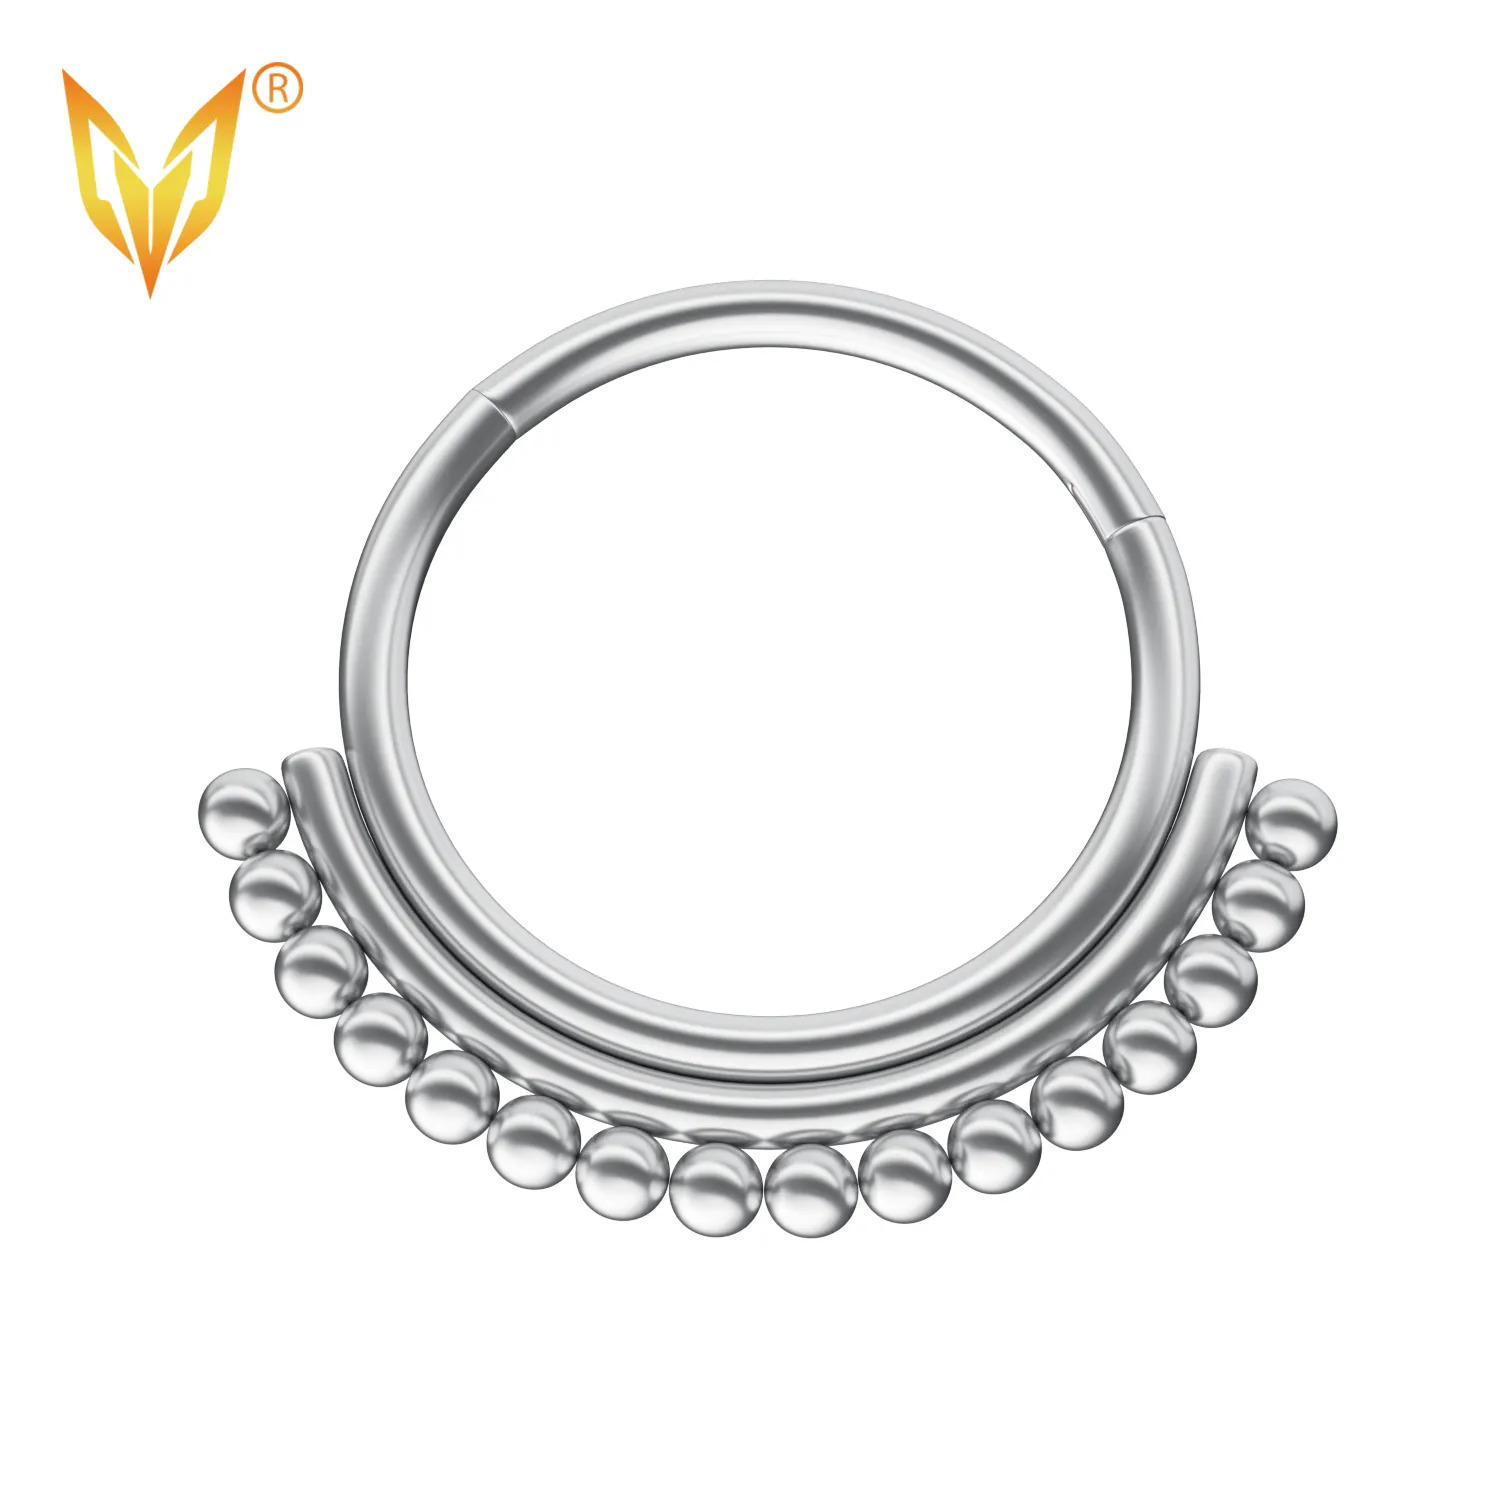 LDOIT ASTM F136/G23 Titanium Hinged Segment Hoop Tribal Asia Ball Hinged Clicker Ring Nose Cloued Nombril Rings Earrings Jewelry